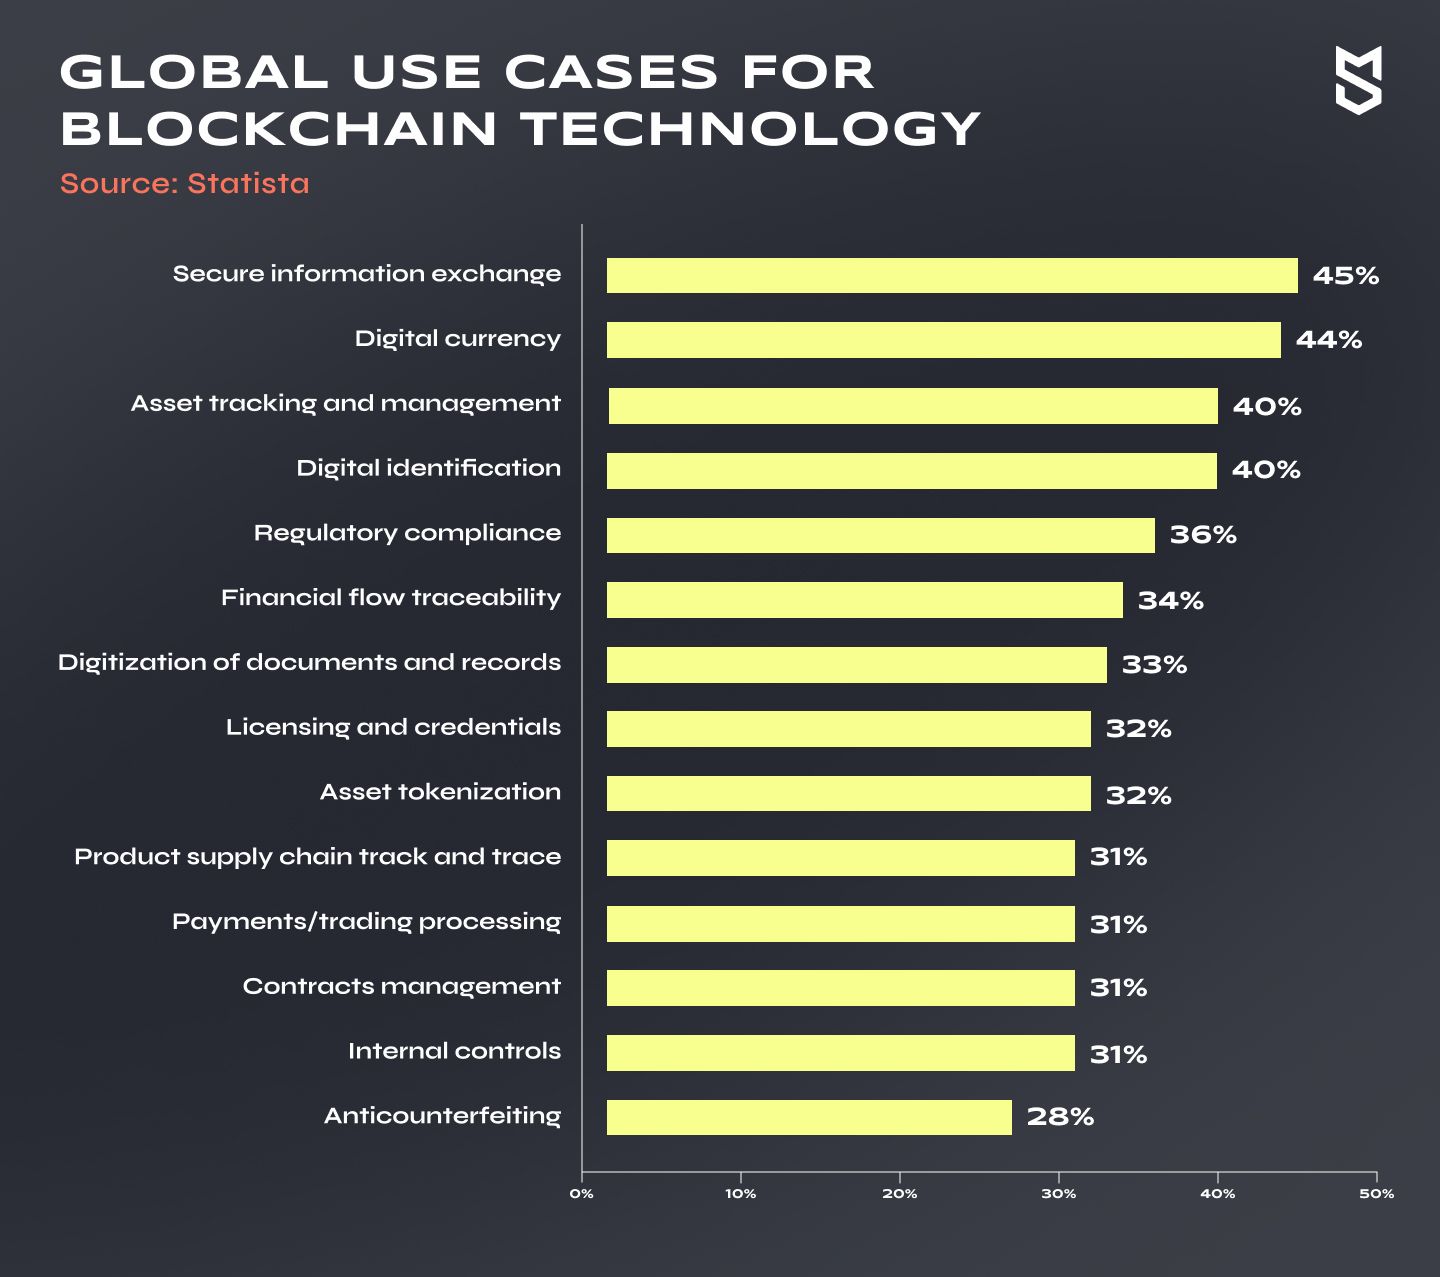 Global use cases for blockchain technology